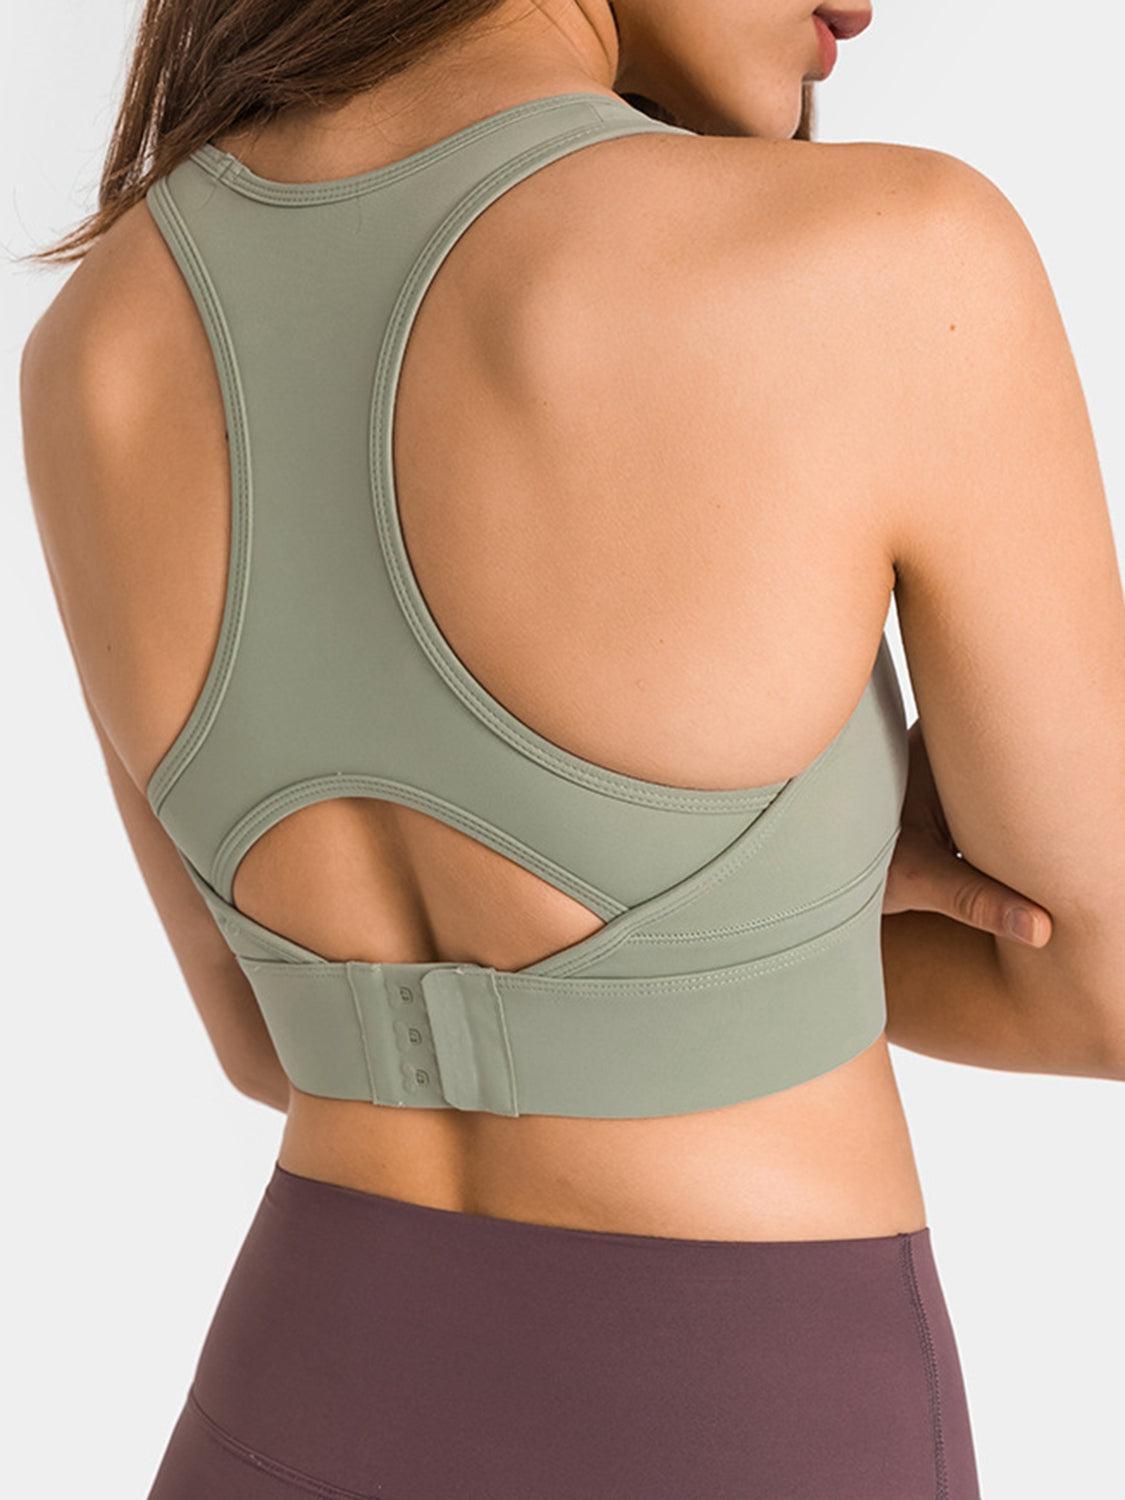 a woman wearing a sports bra top with a back cut out